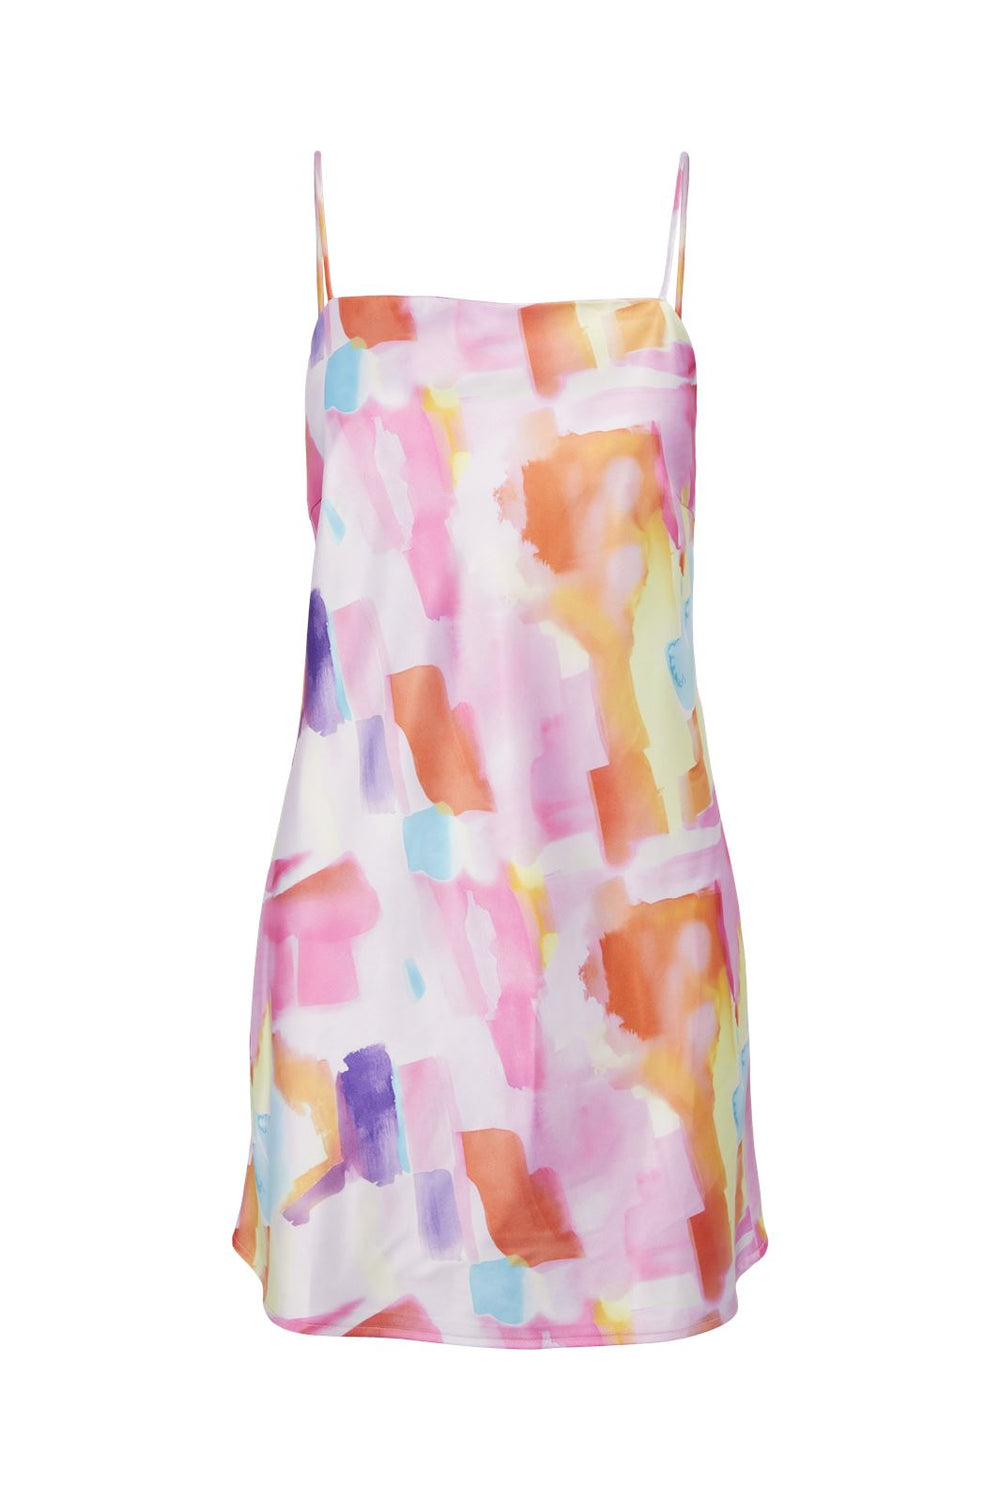 Pieces - Pcsummer Strap Short Dress Mm - 4657766 Begonia Pink Abstract